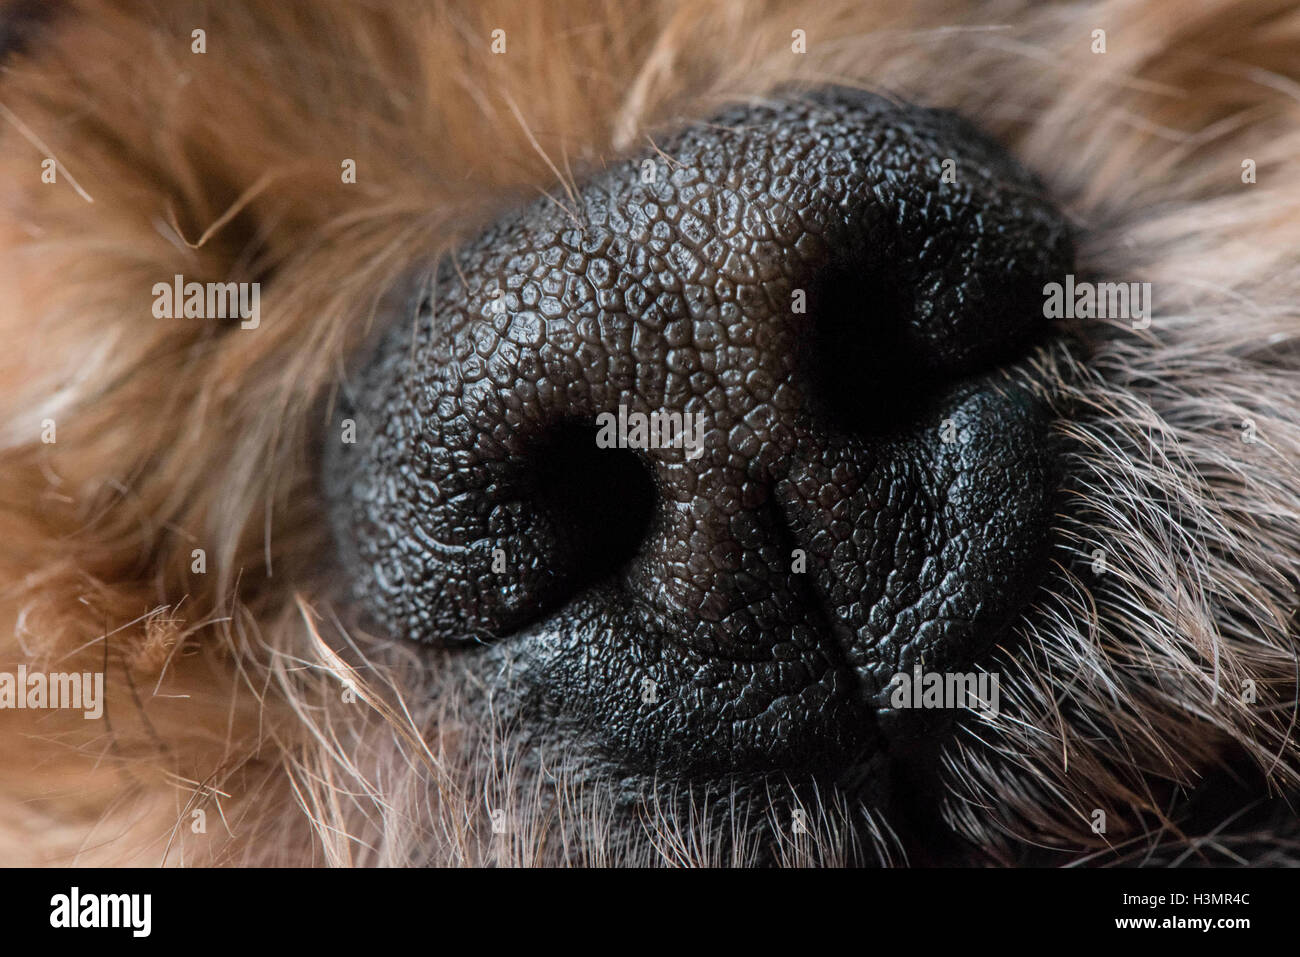 Close up of Dogs nose Stock Photo